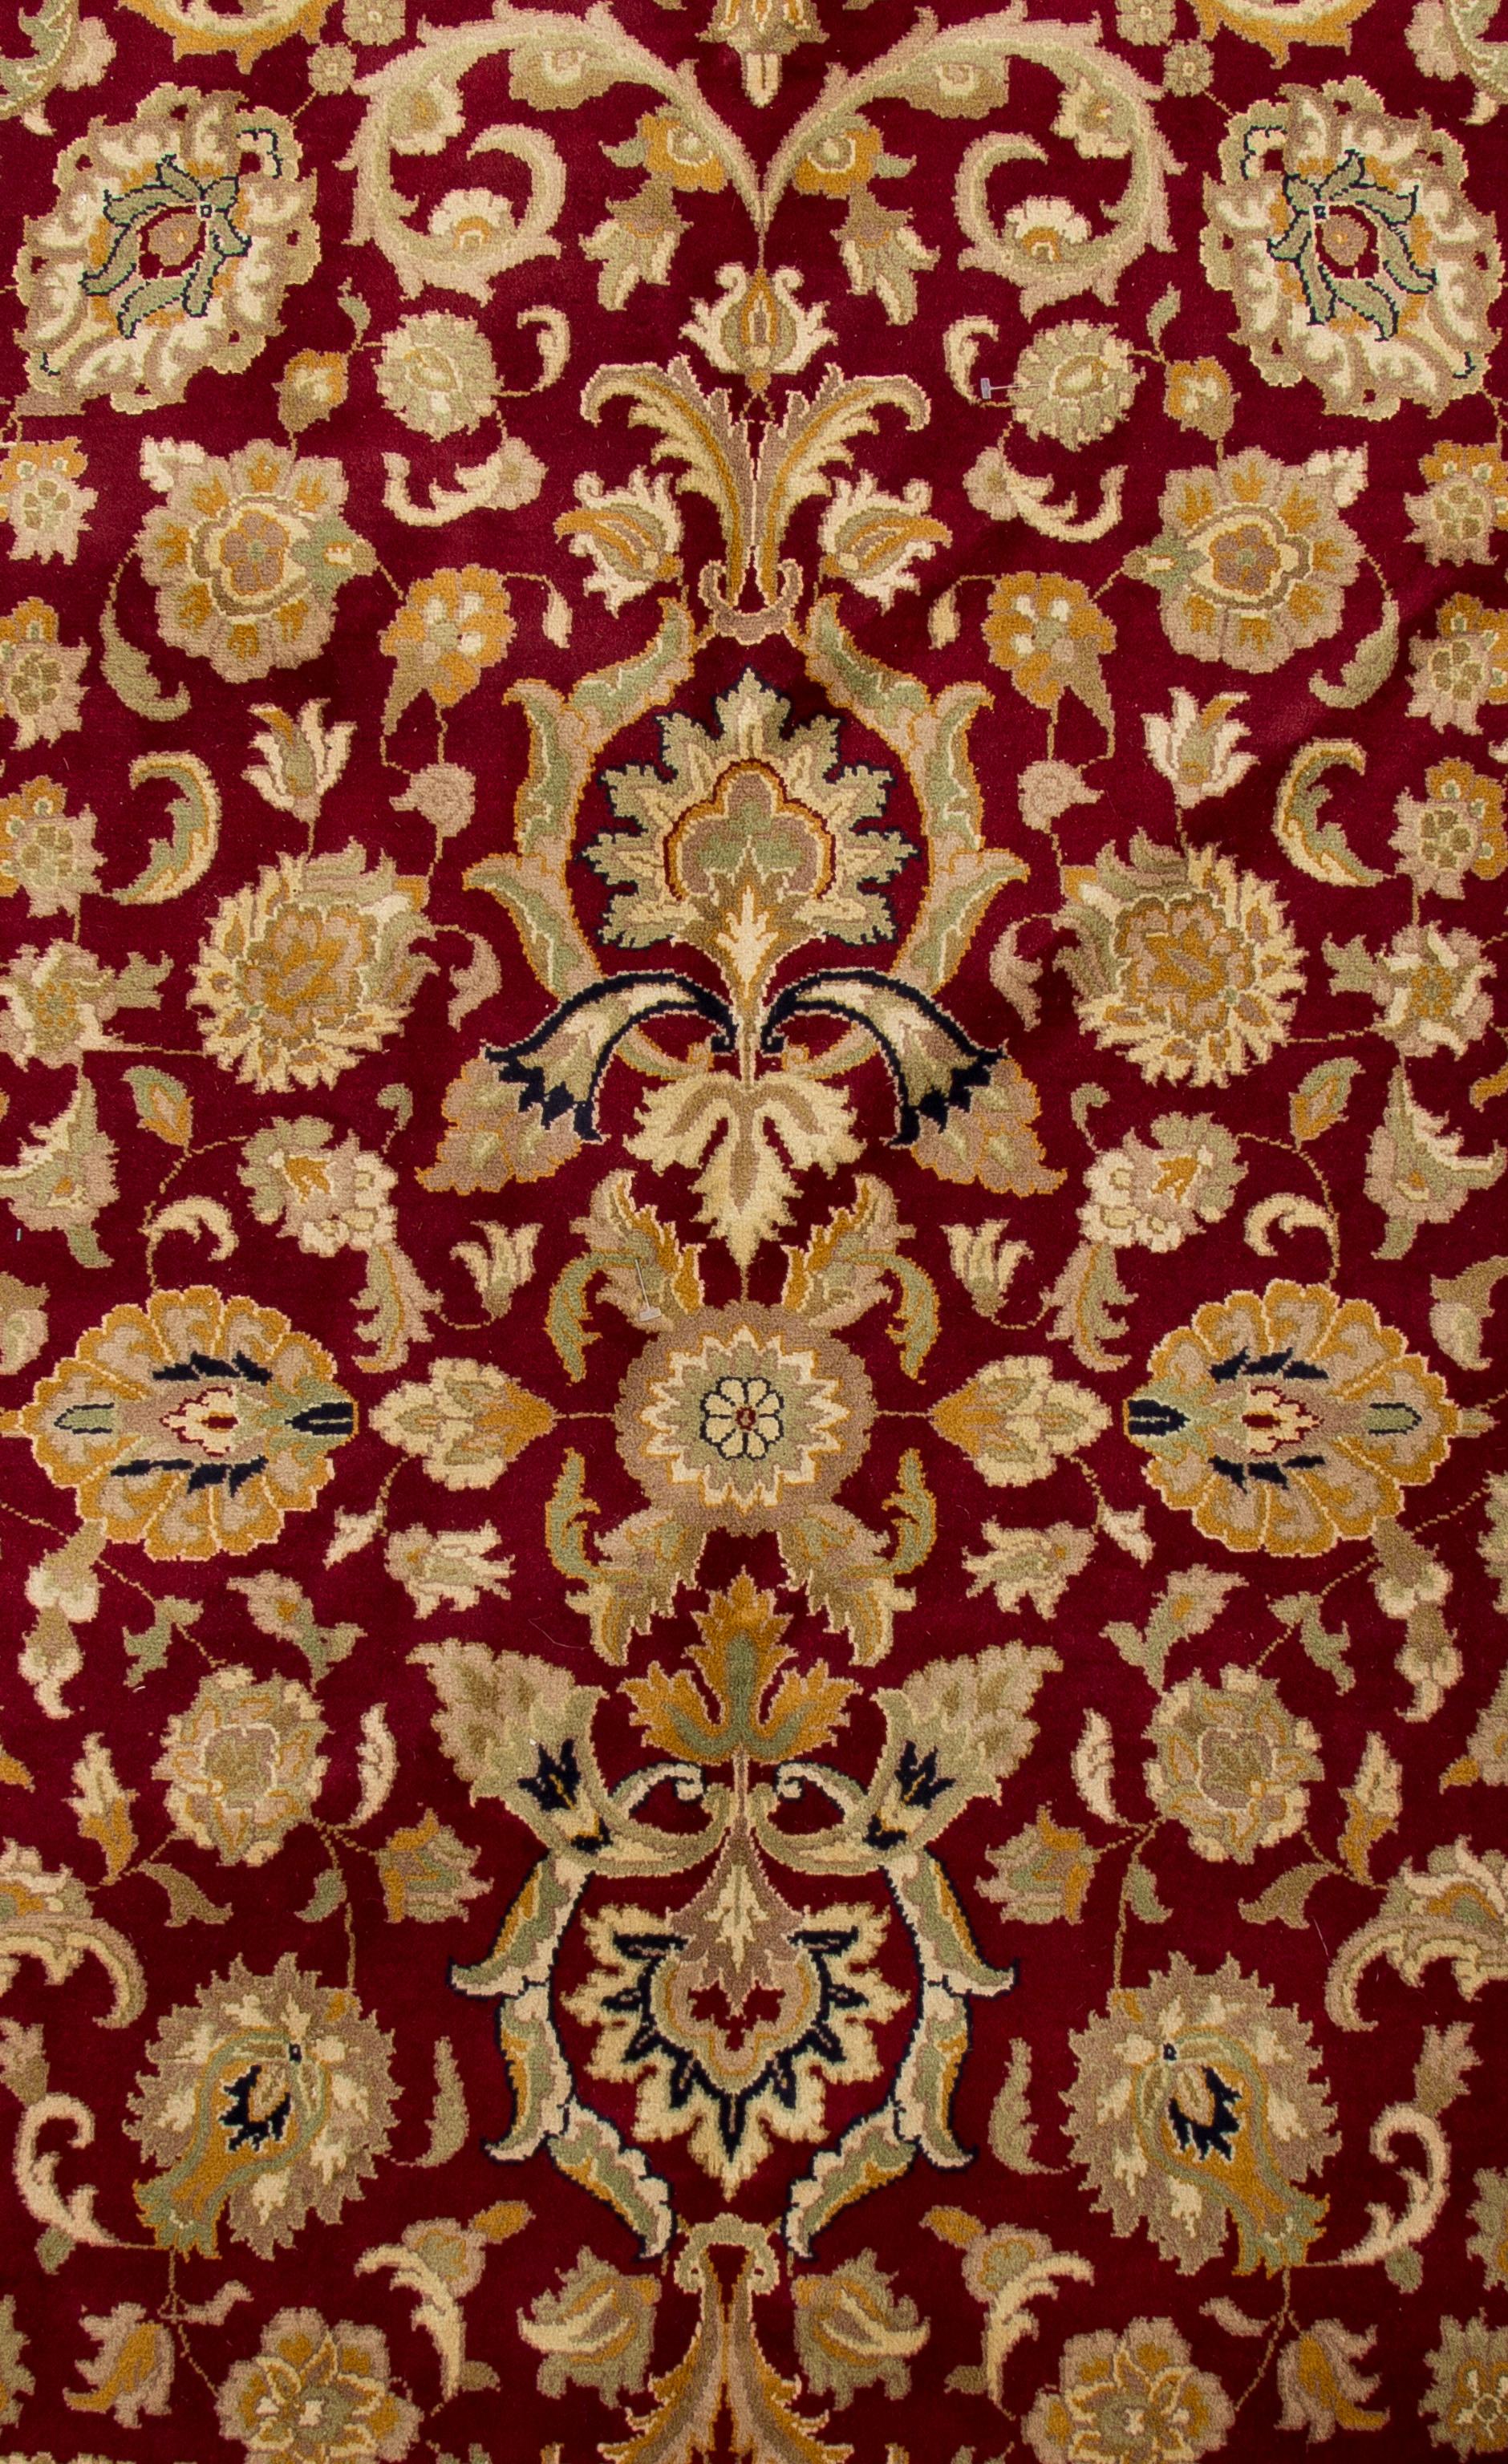 This carpet has an all-over design that is based on a repeated motif. This gives it a feeling of balance and elegance with its rich and vibrant color, adding a formal and sophisticated touch to any traditional room design. Made of the finest lamb’s